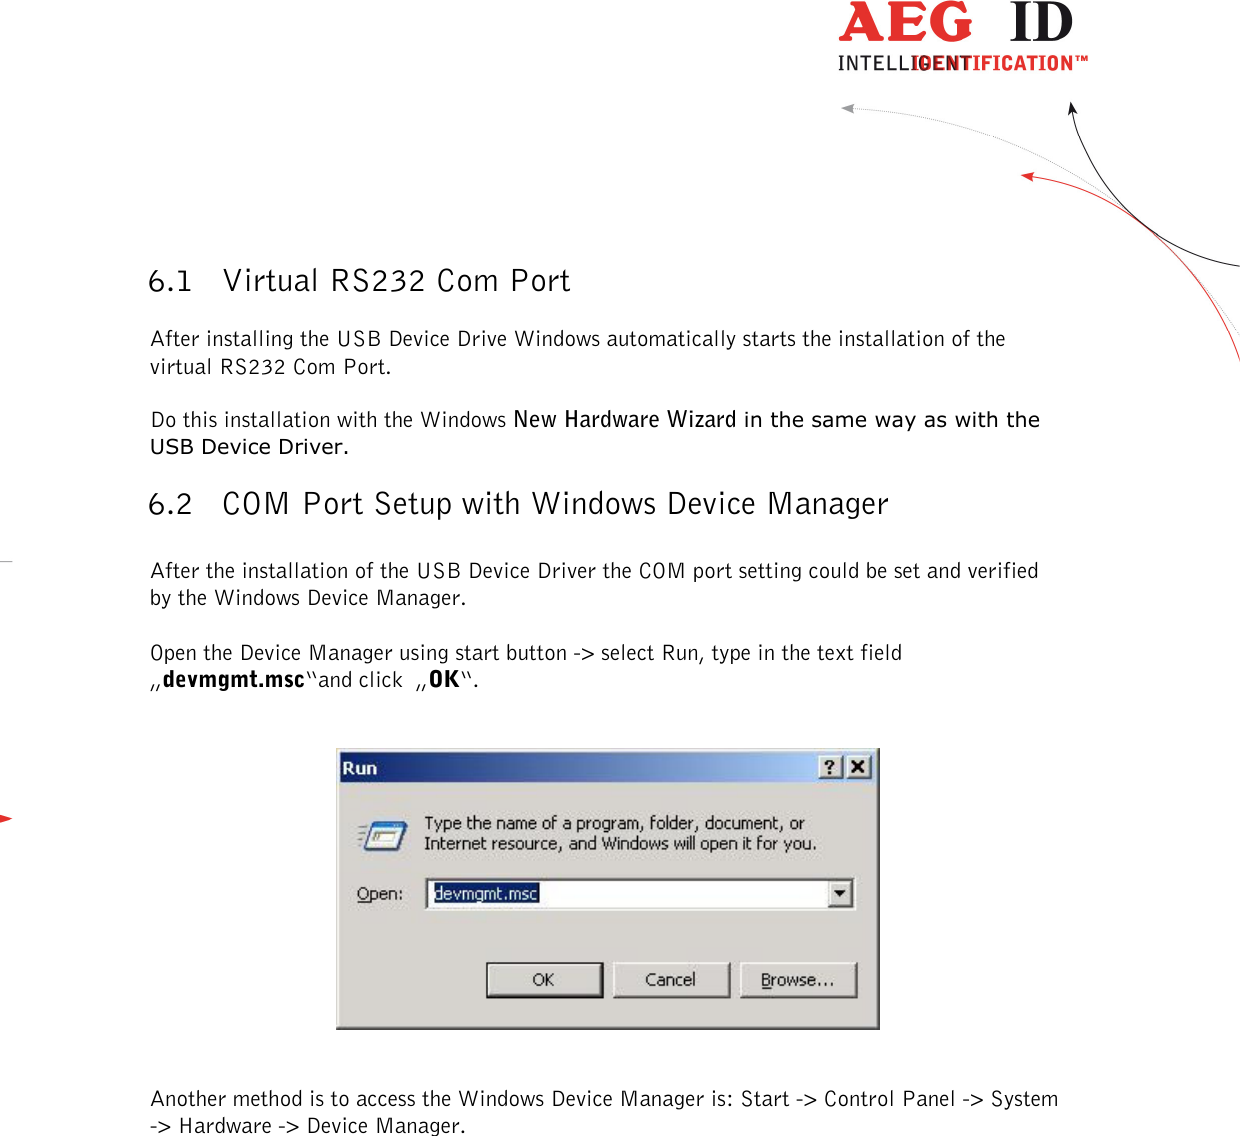  ---------------------------------------------------------------30/36-------------------------------------------------------------    6.1 Virtual RS232 Com Port After installing the USB Device Drive Windows automatically starts the installation of the virtual RS232 Com Port. Do this installation with the Windows New Hardware Wizard in the same way as with the USB Device Driver. 6.2 COM Port Setup with Windows Device Manager  After the installation of the USB Device Driver the COM port setting could be set and verified by the Windows Device Manager.  Open the Device Manager using start button -&gt; select Run, type in the text field „devmgmt.msc“and click  „OK“.      Another method is to access the Windows Device Manager is: Start -&gt; Control Panel -&gt; System -&gt; Hardware -&gt; Device Manager.   